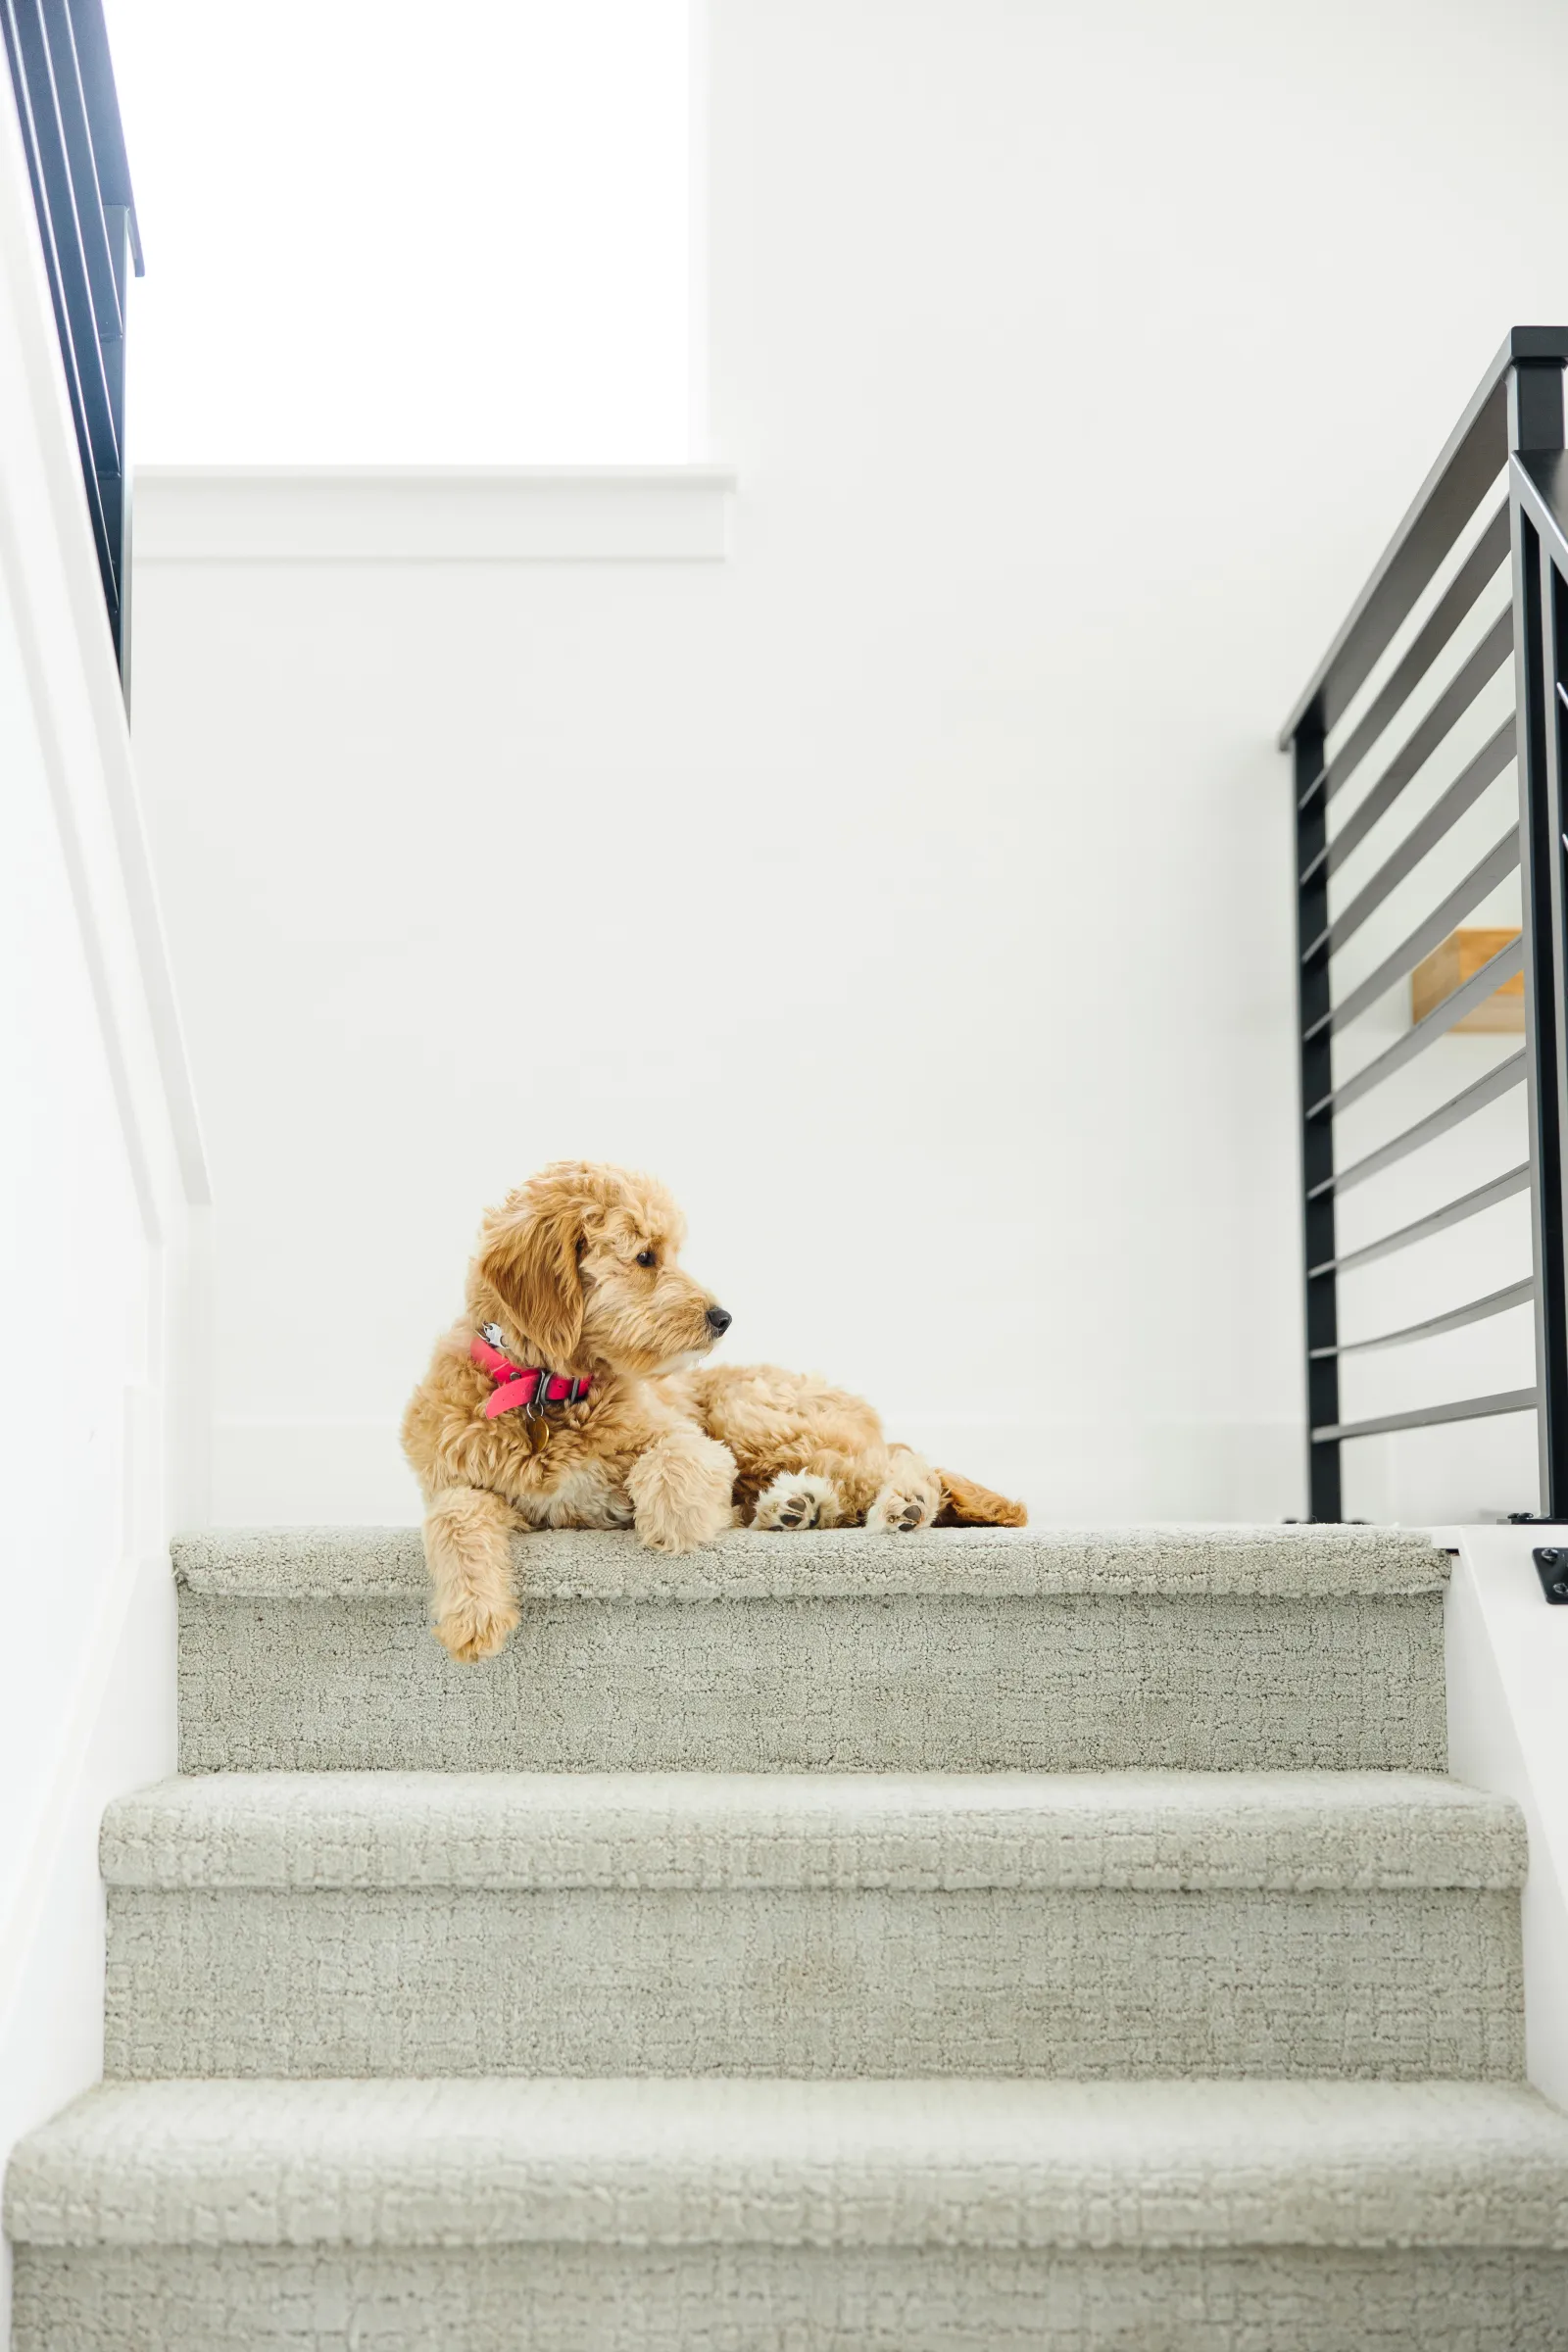 Small dog with a red collar sitting at the top of carpeted stairs